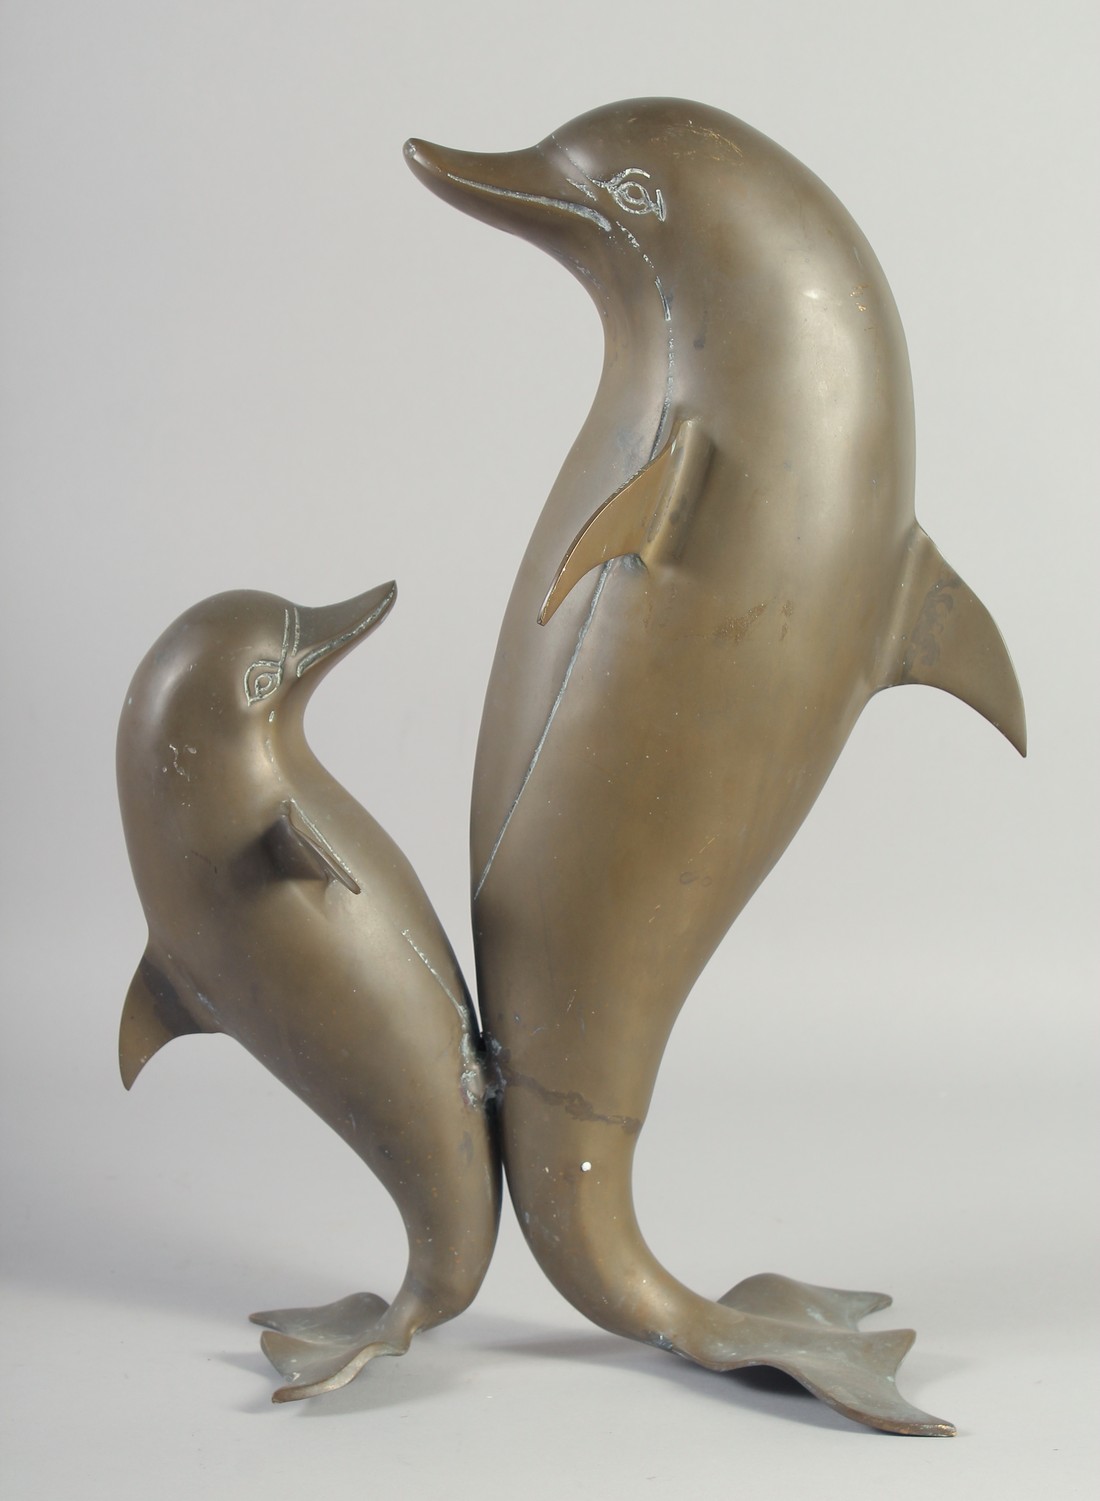 A MODERN ART BRONZE OF TWO DANCING DOLPHINS. 18ins high.